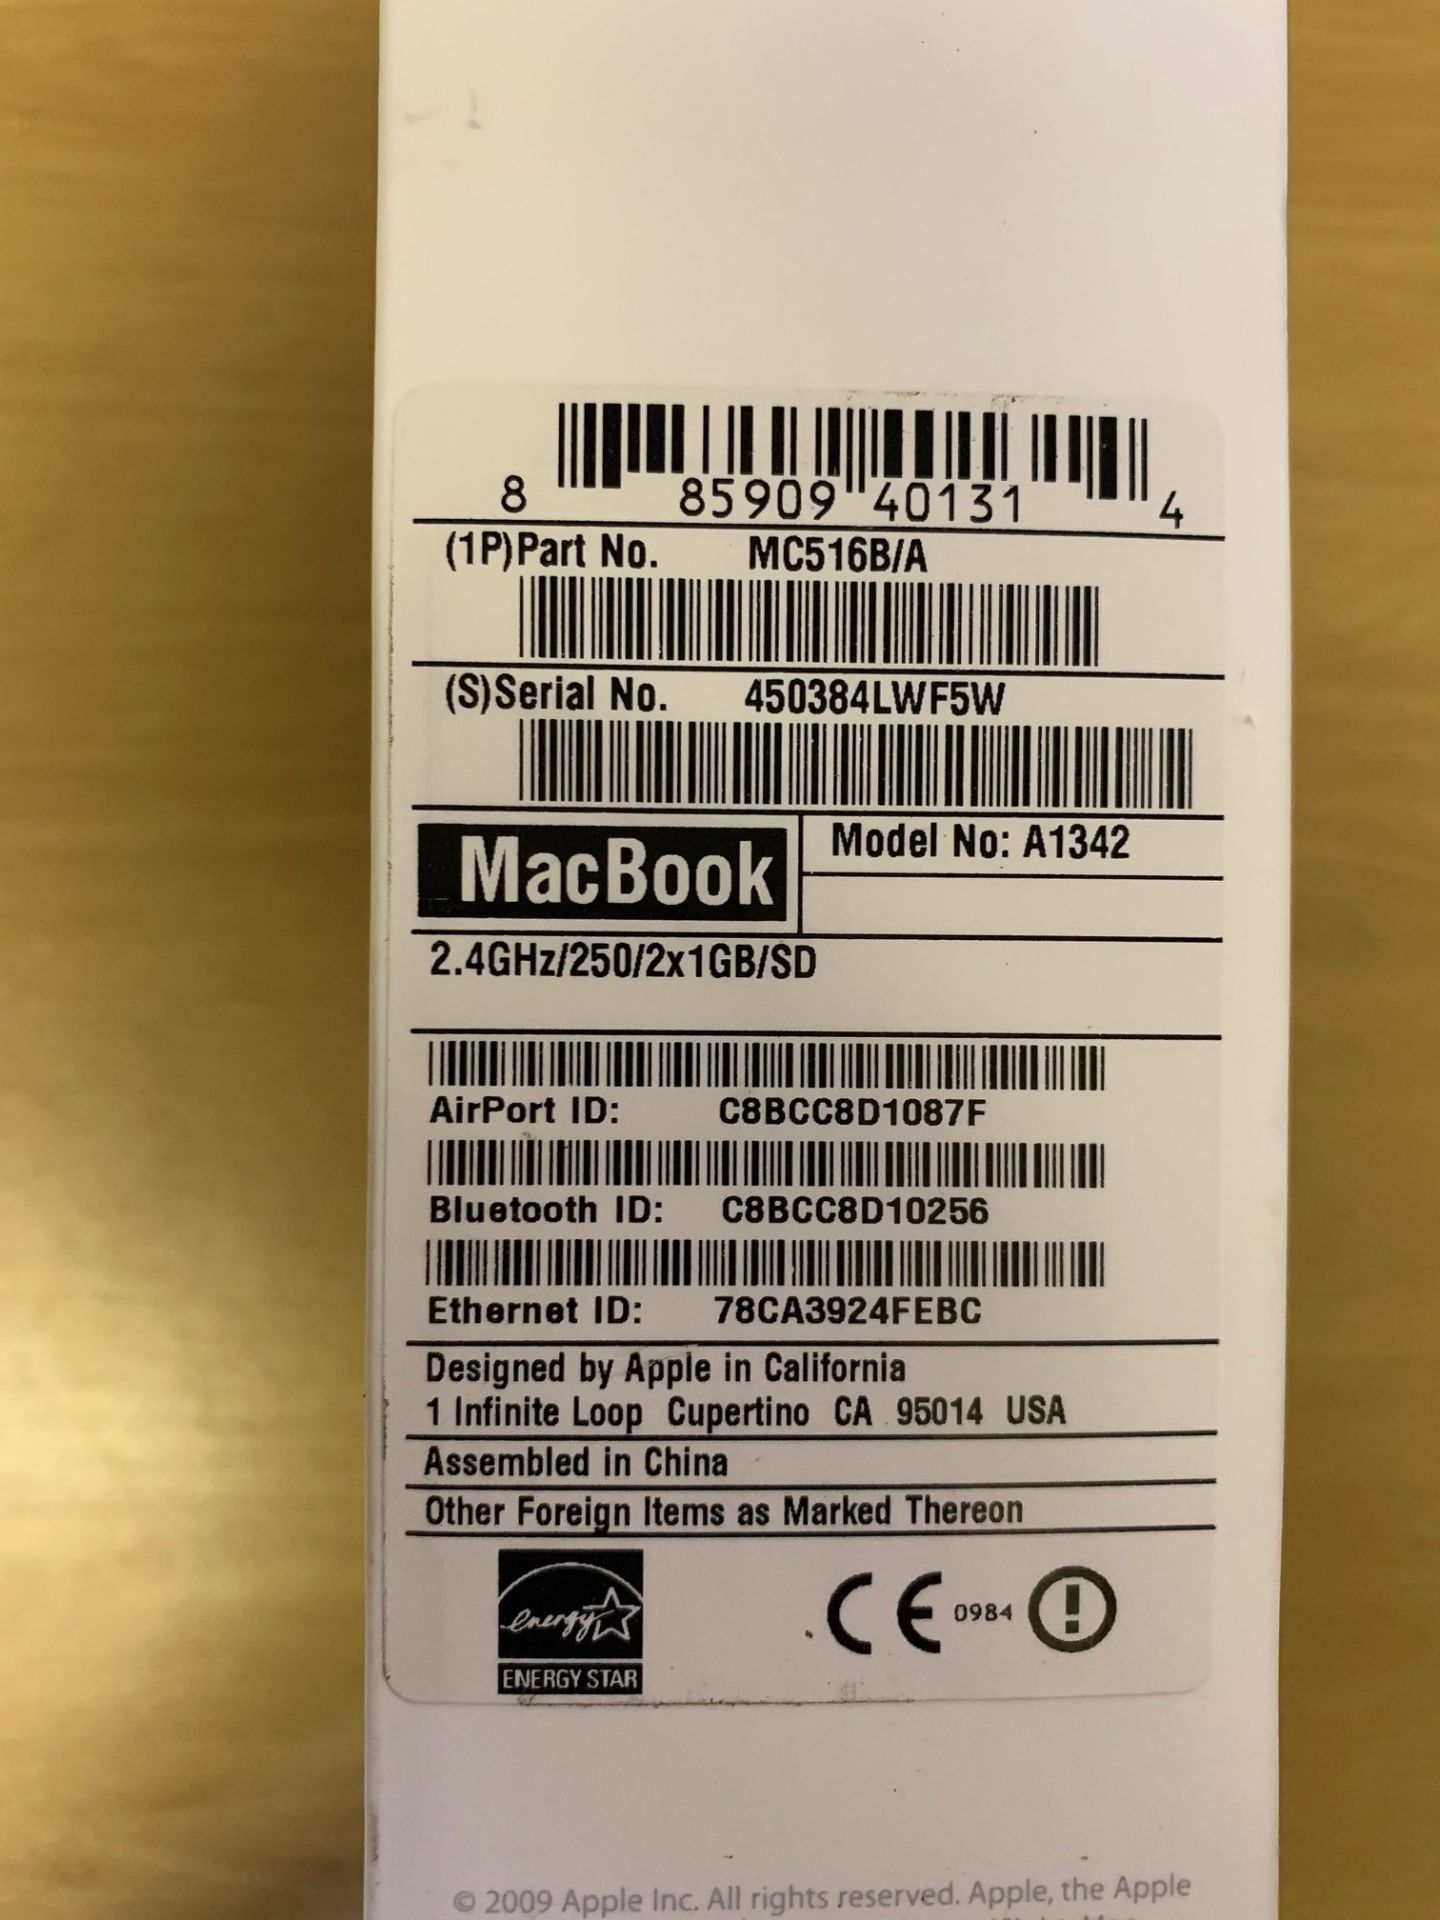 Apple MacBook - Model A1342, 2.4GHz, 250GB Hard Drive, Includes Box & Charger - Image 4 of 4